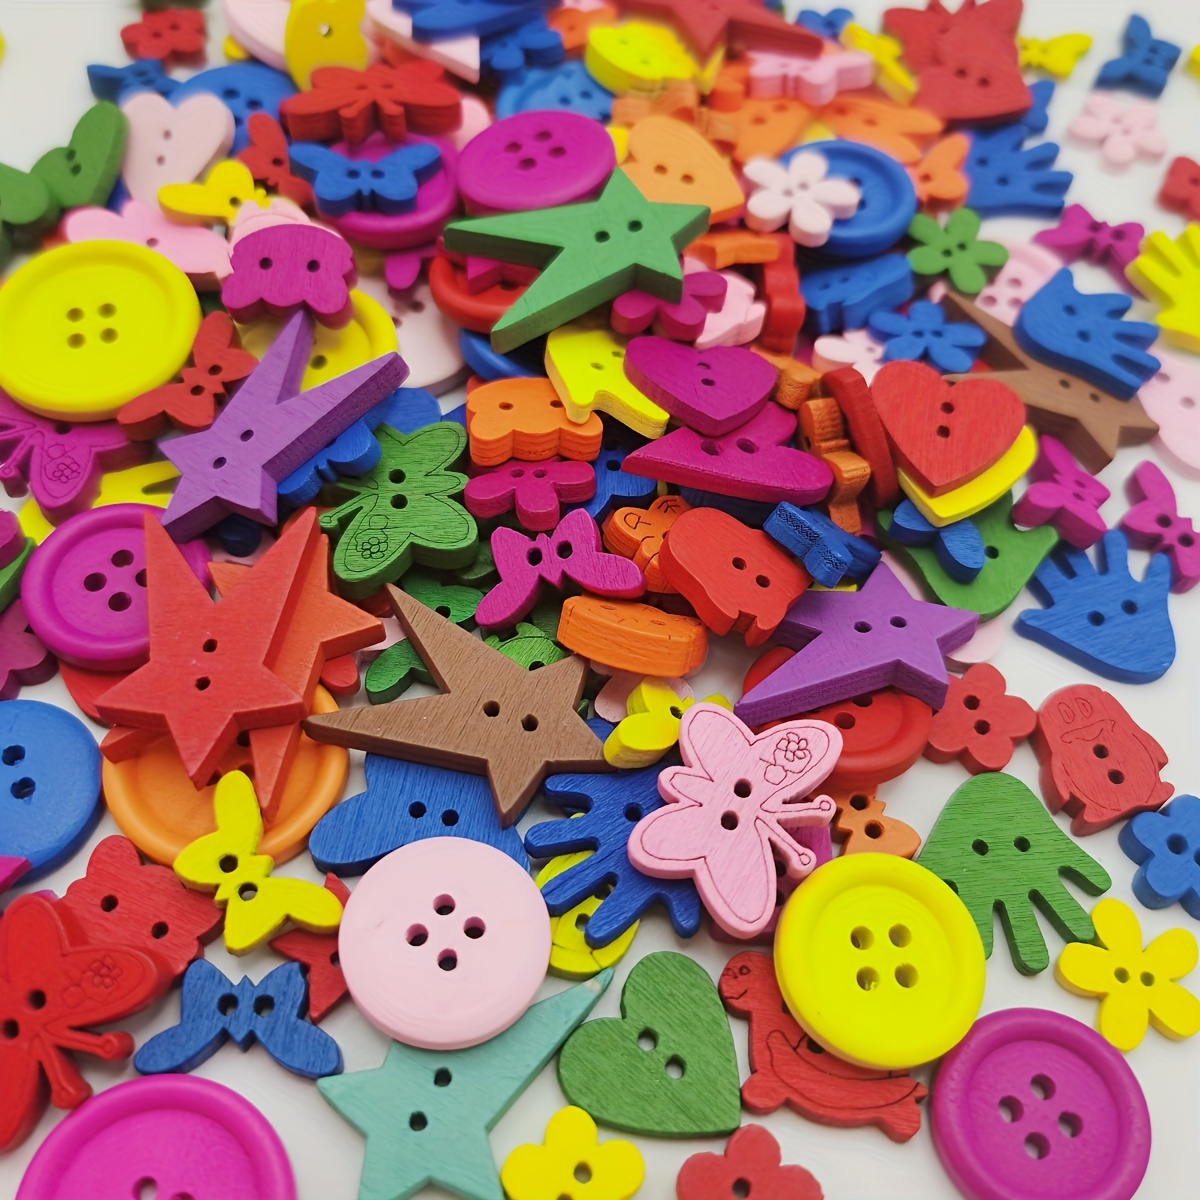 Heart Shaped Buttons - Plastic Heart Buttons - 100pcs Mixed Heart Buttons  Sewing Craft Two Holes Buttons (Heart Craft Buttons)